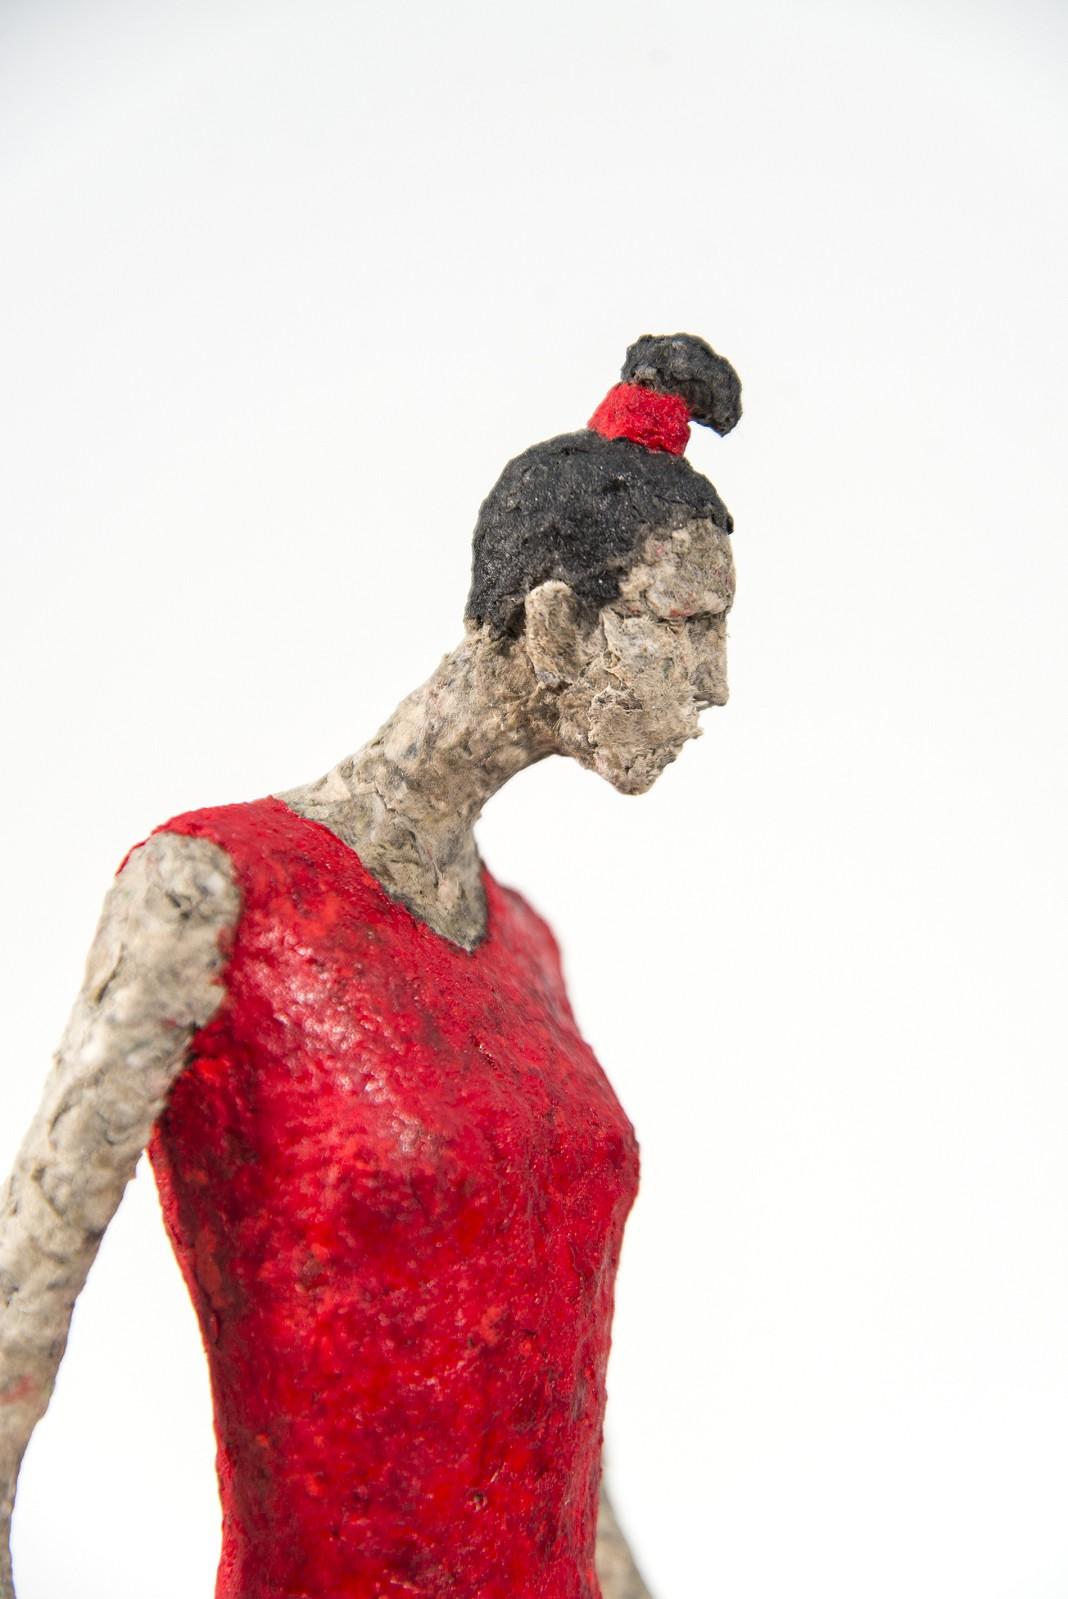 Quebecois sculptor Paul Duval has created a series of expressive paper mache and wire figurative sculptures. Each one exudes a different personality evident in their posture, gesture, and colour. 

An imposing female figure stands, arms